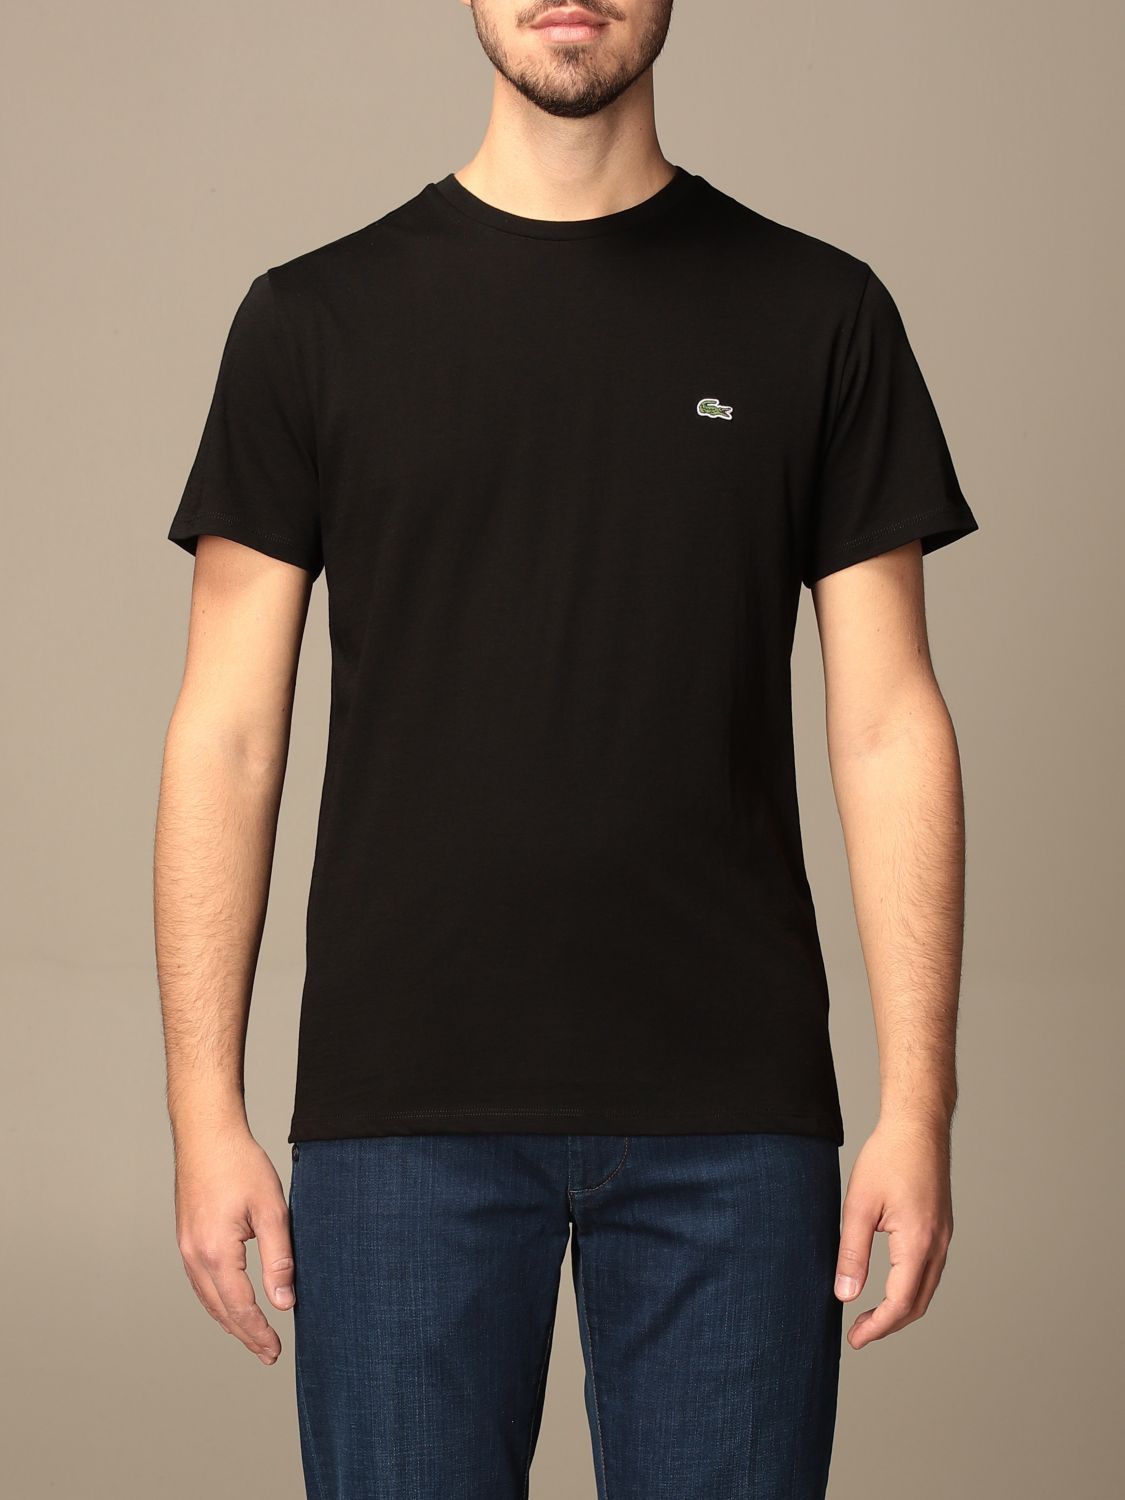 Verwacht het Komkommer staart LACOSTE: basic cotton t-shirt with logo - Black | Lacoste t-shirt TH6709  online on GIGLIO.COM